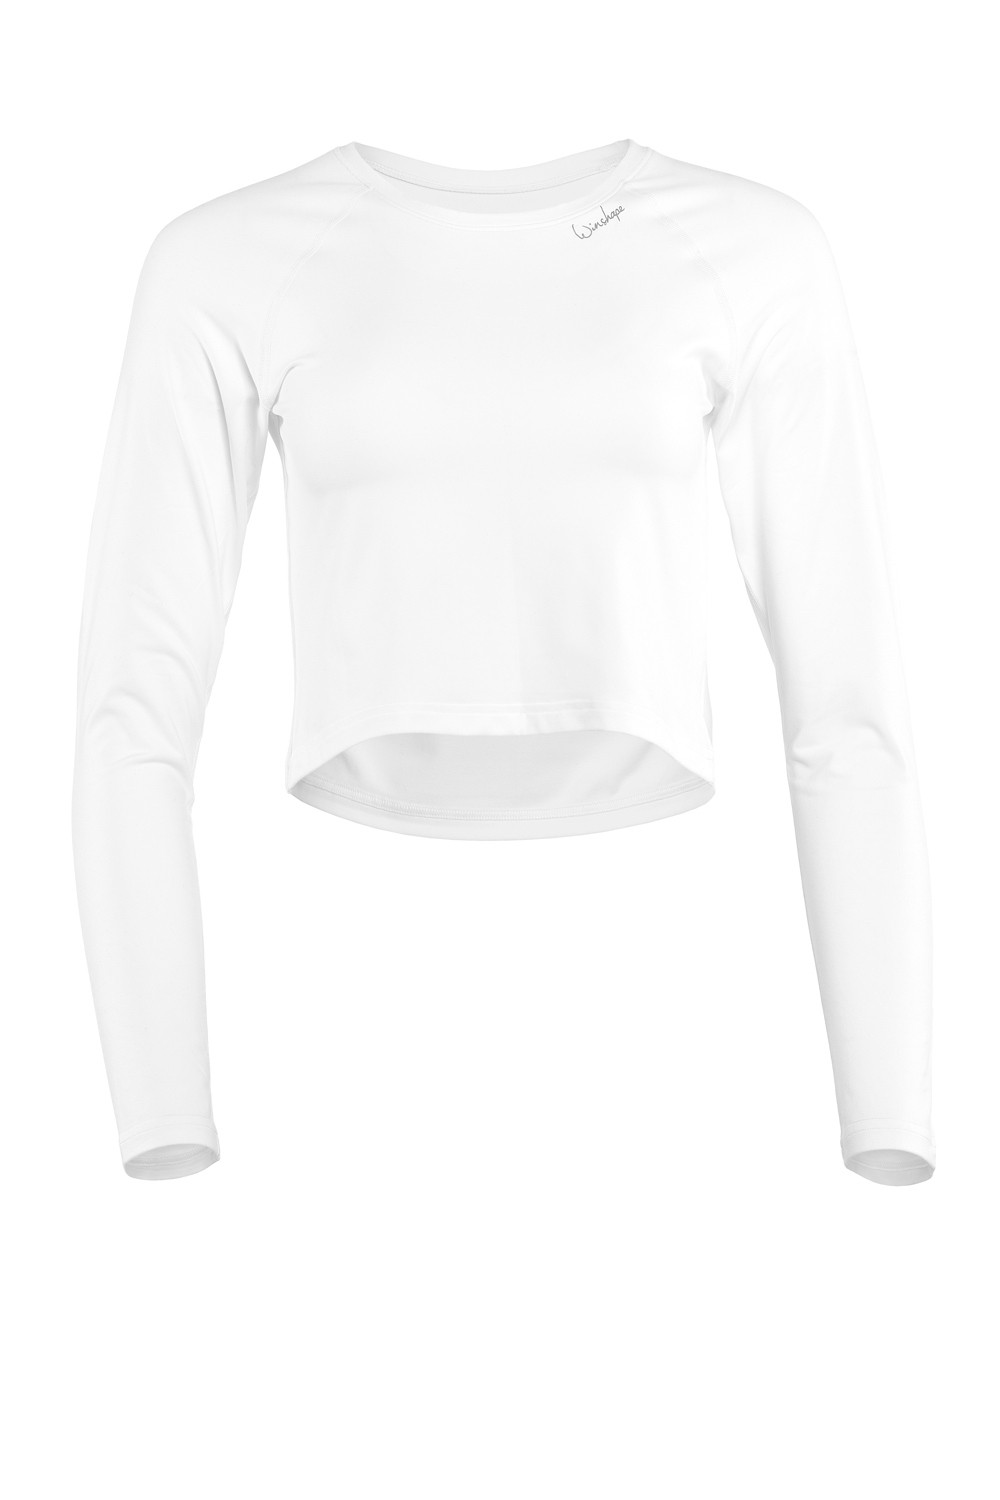 AET116LS, Winshape Long Cropped and Soft Ultra Soft Top Style ivory, Light Sleeve Functional